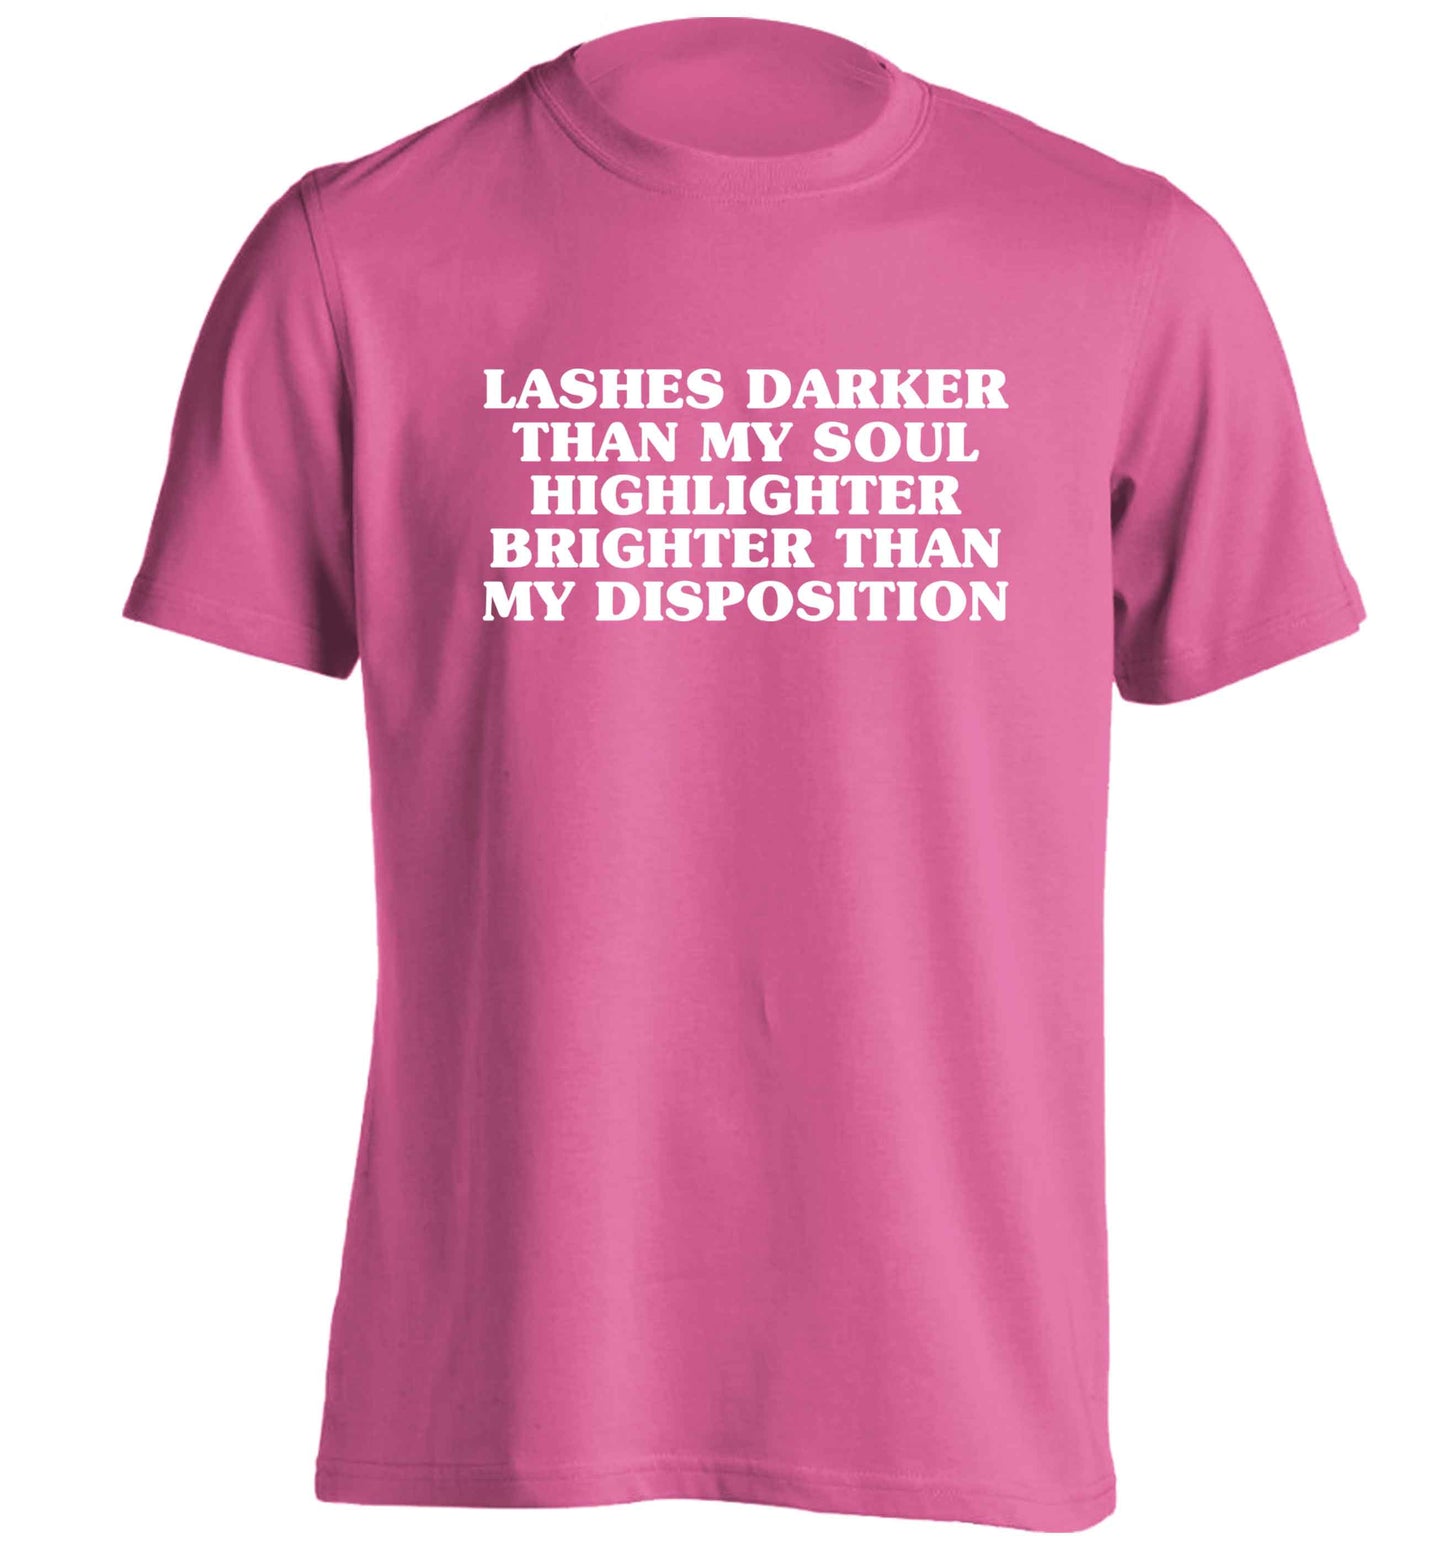 Lashes darker than my soul, highlighter brighter than my disposition adults unisex pink Tshirt 2XL